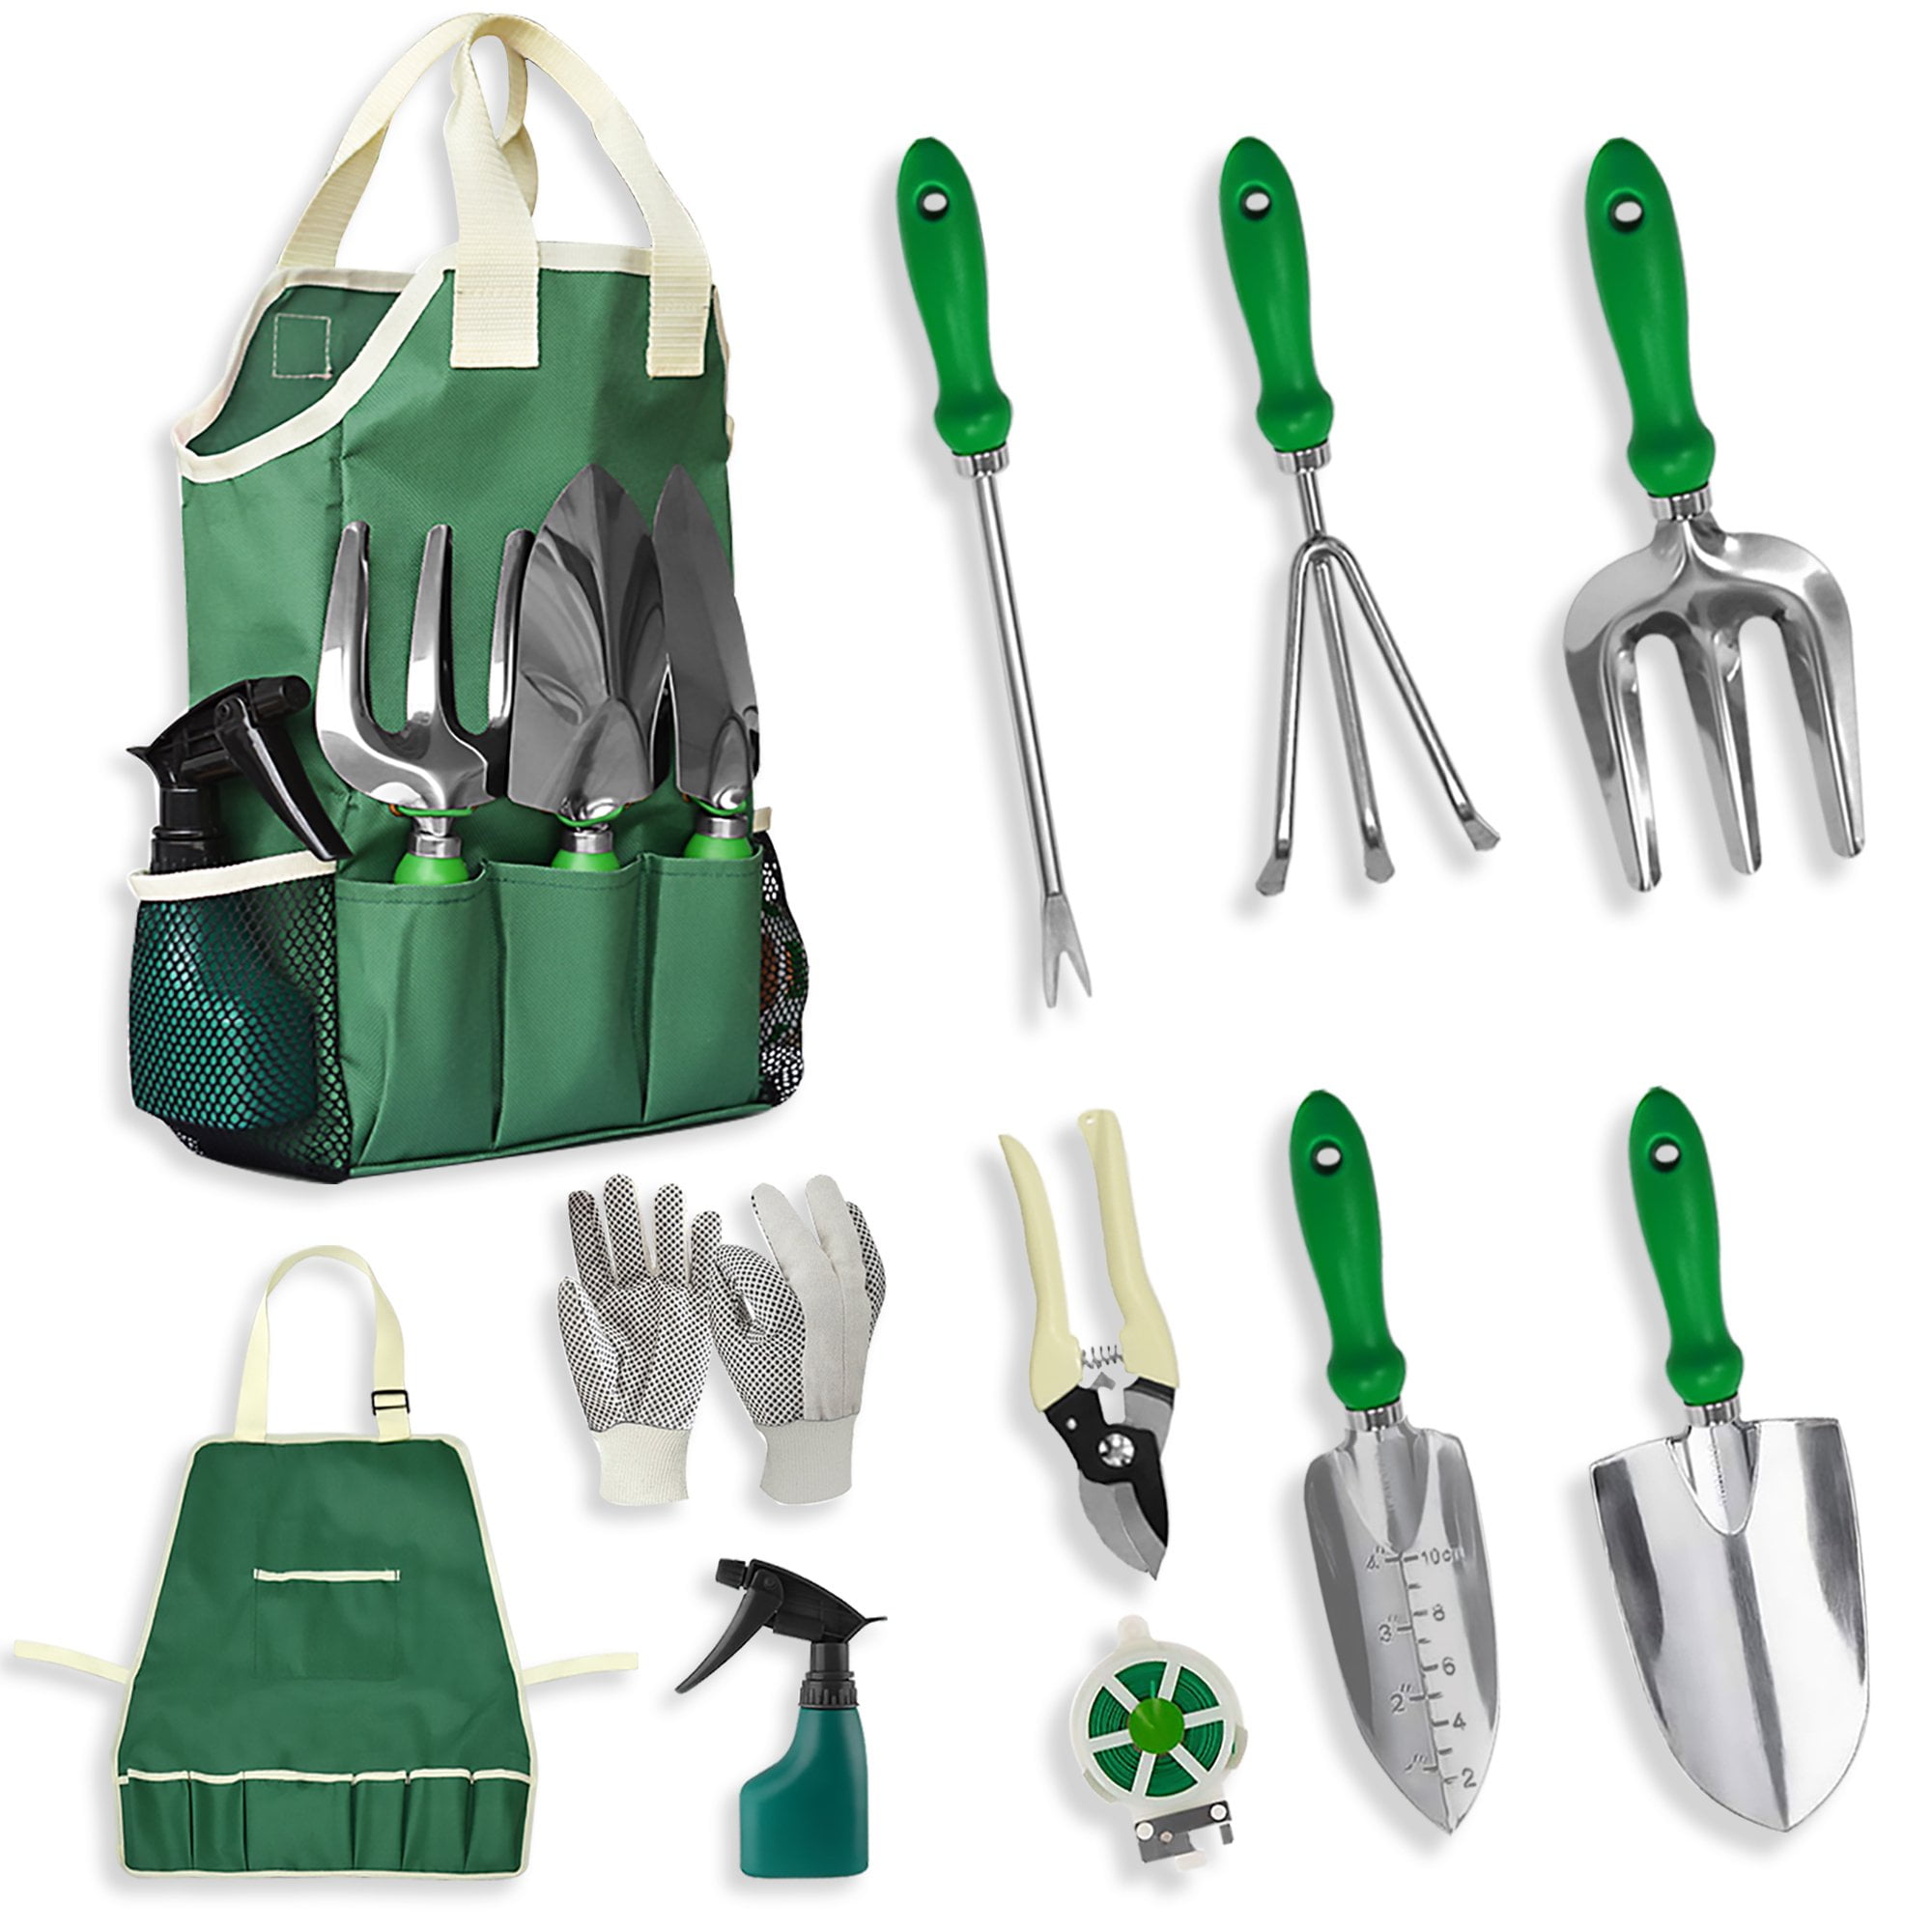 Details about   Garden Tools Set 11 Piece Heavy Duty Gardening Kit Gardening Tools with Gloves 